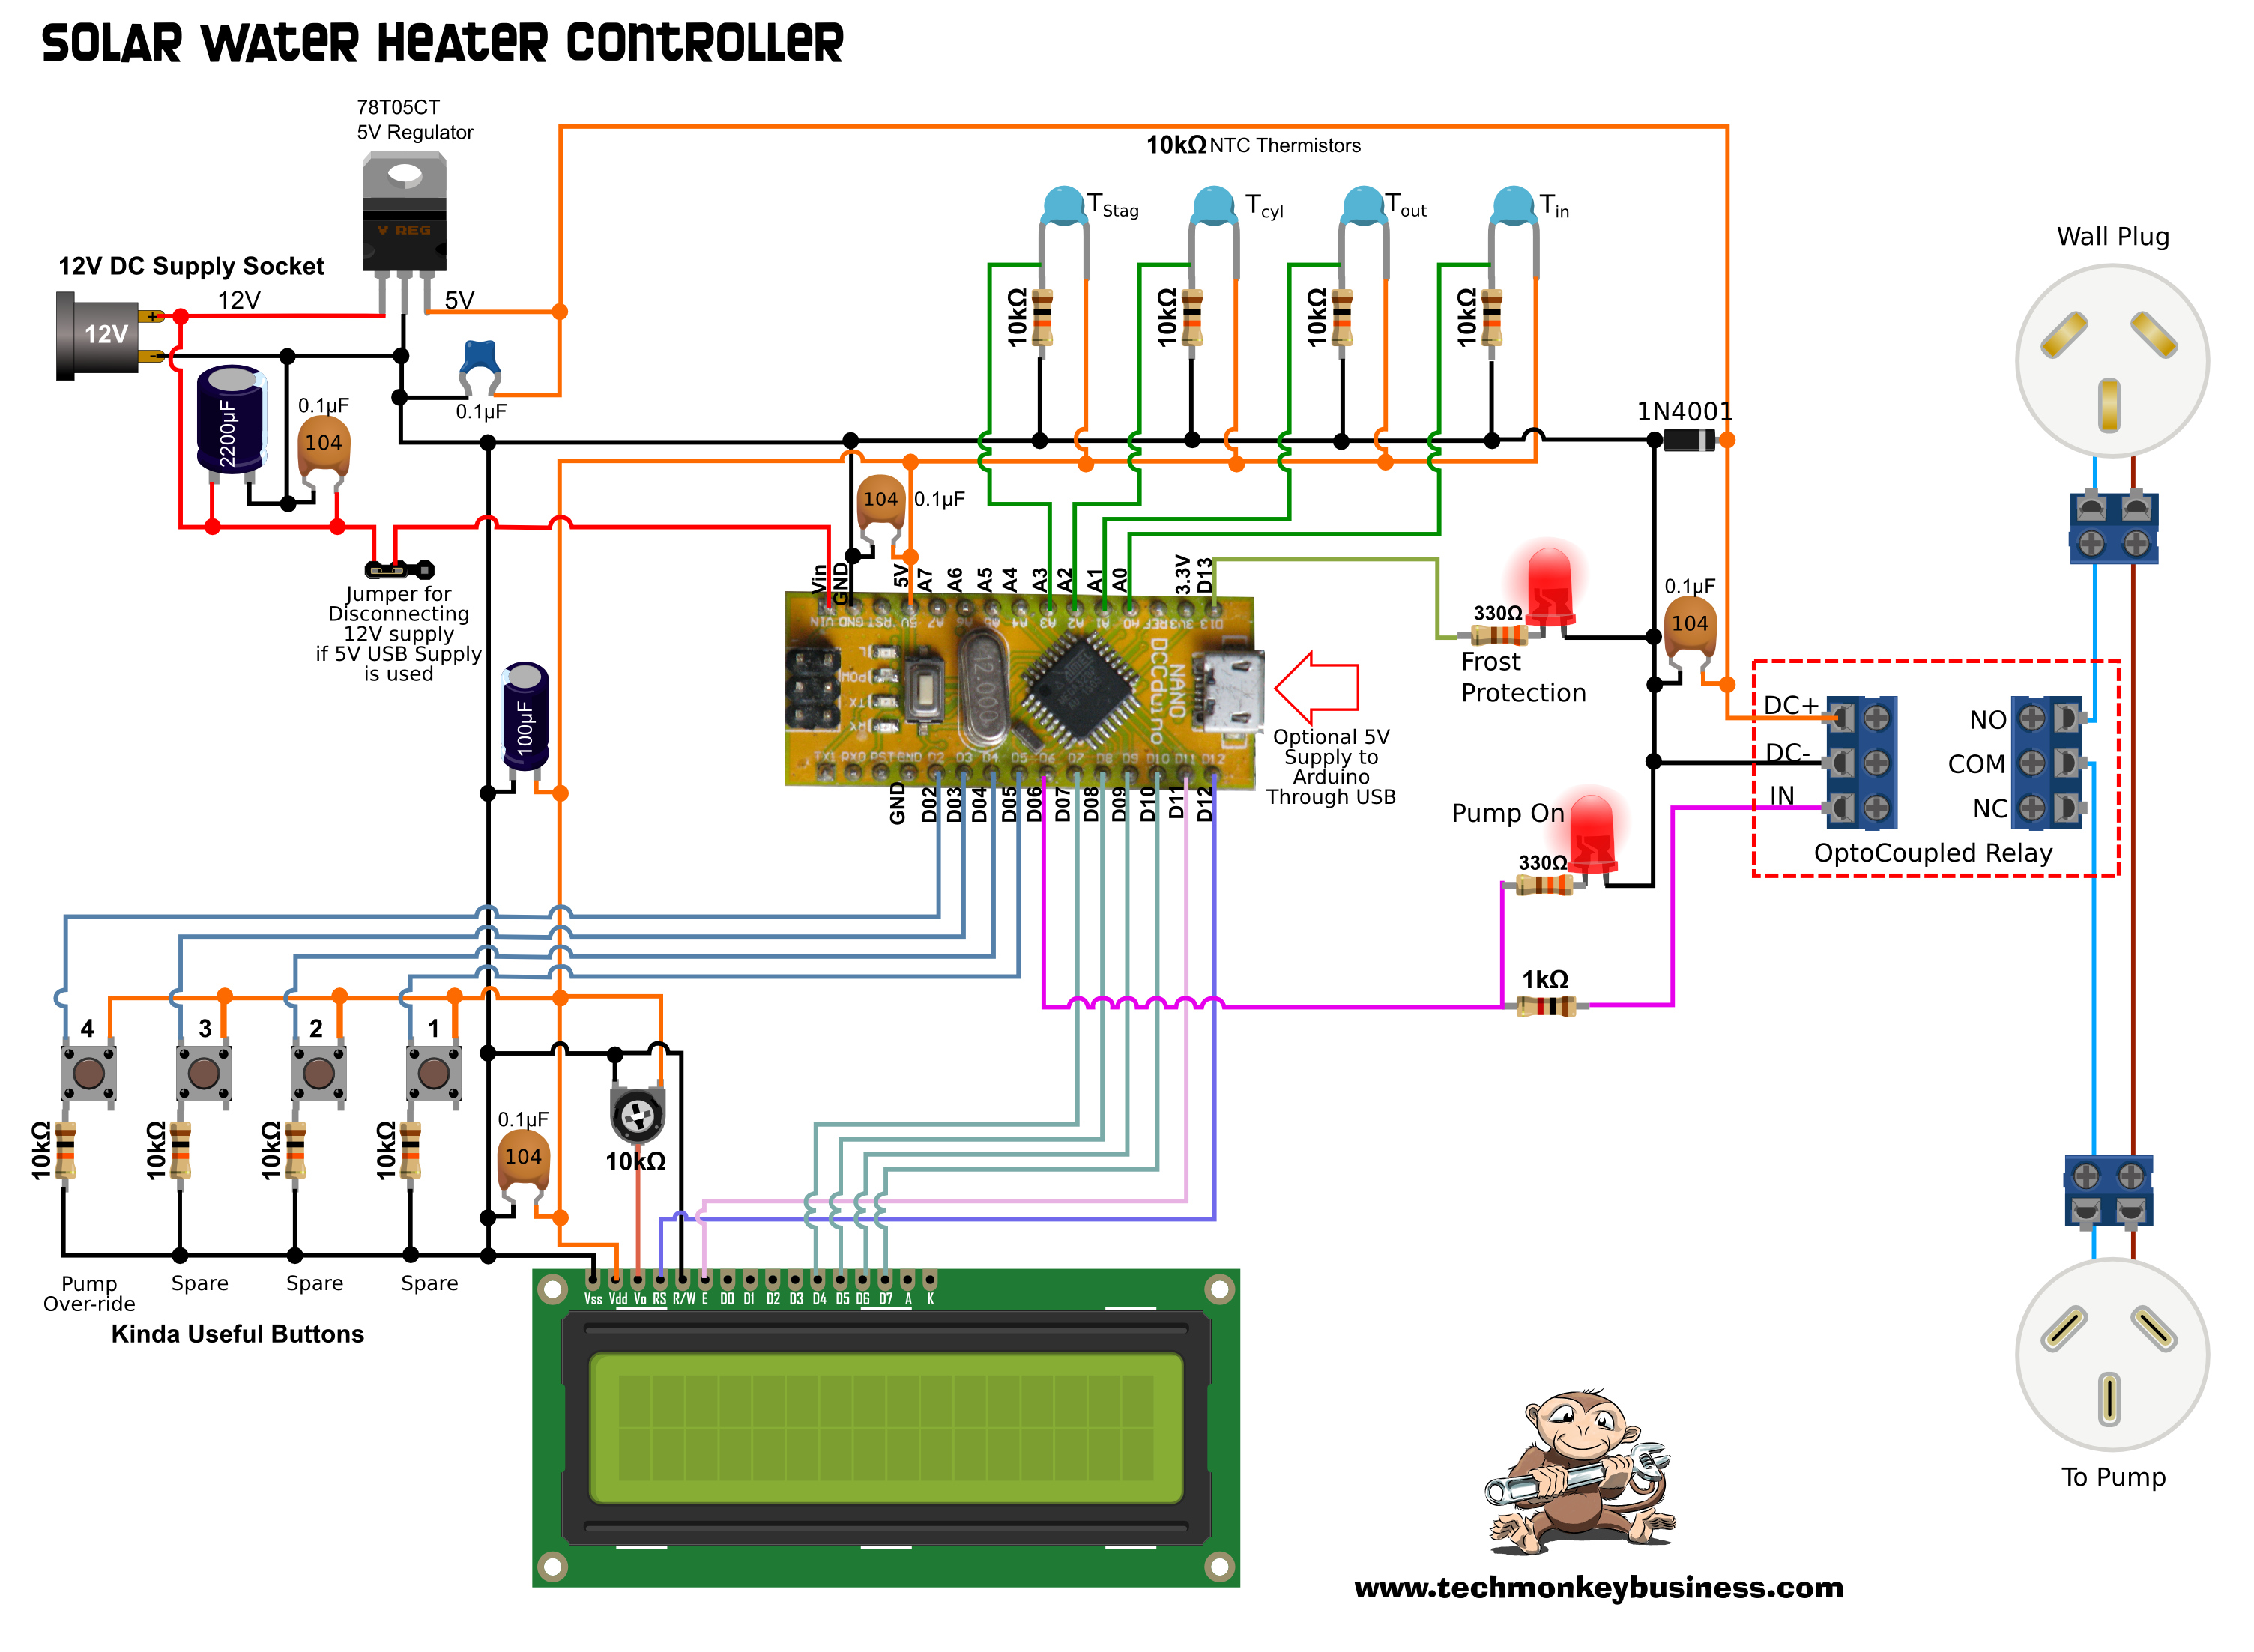 The Solar Water Heater Controller In The Real World